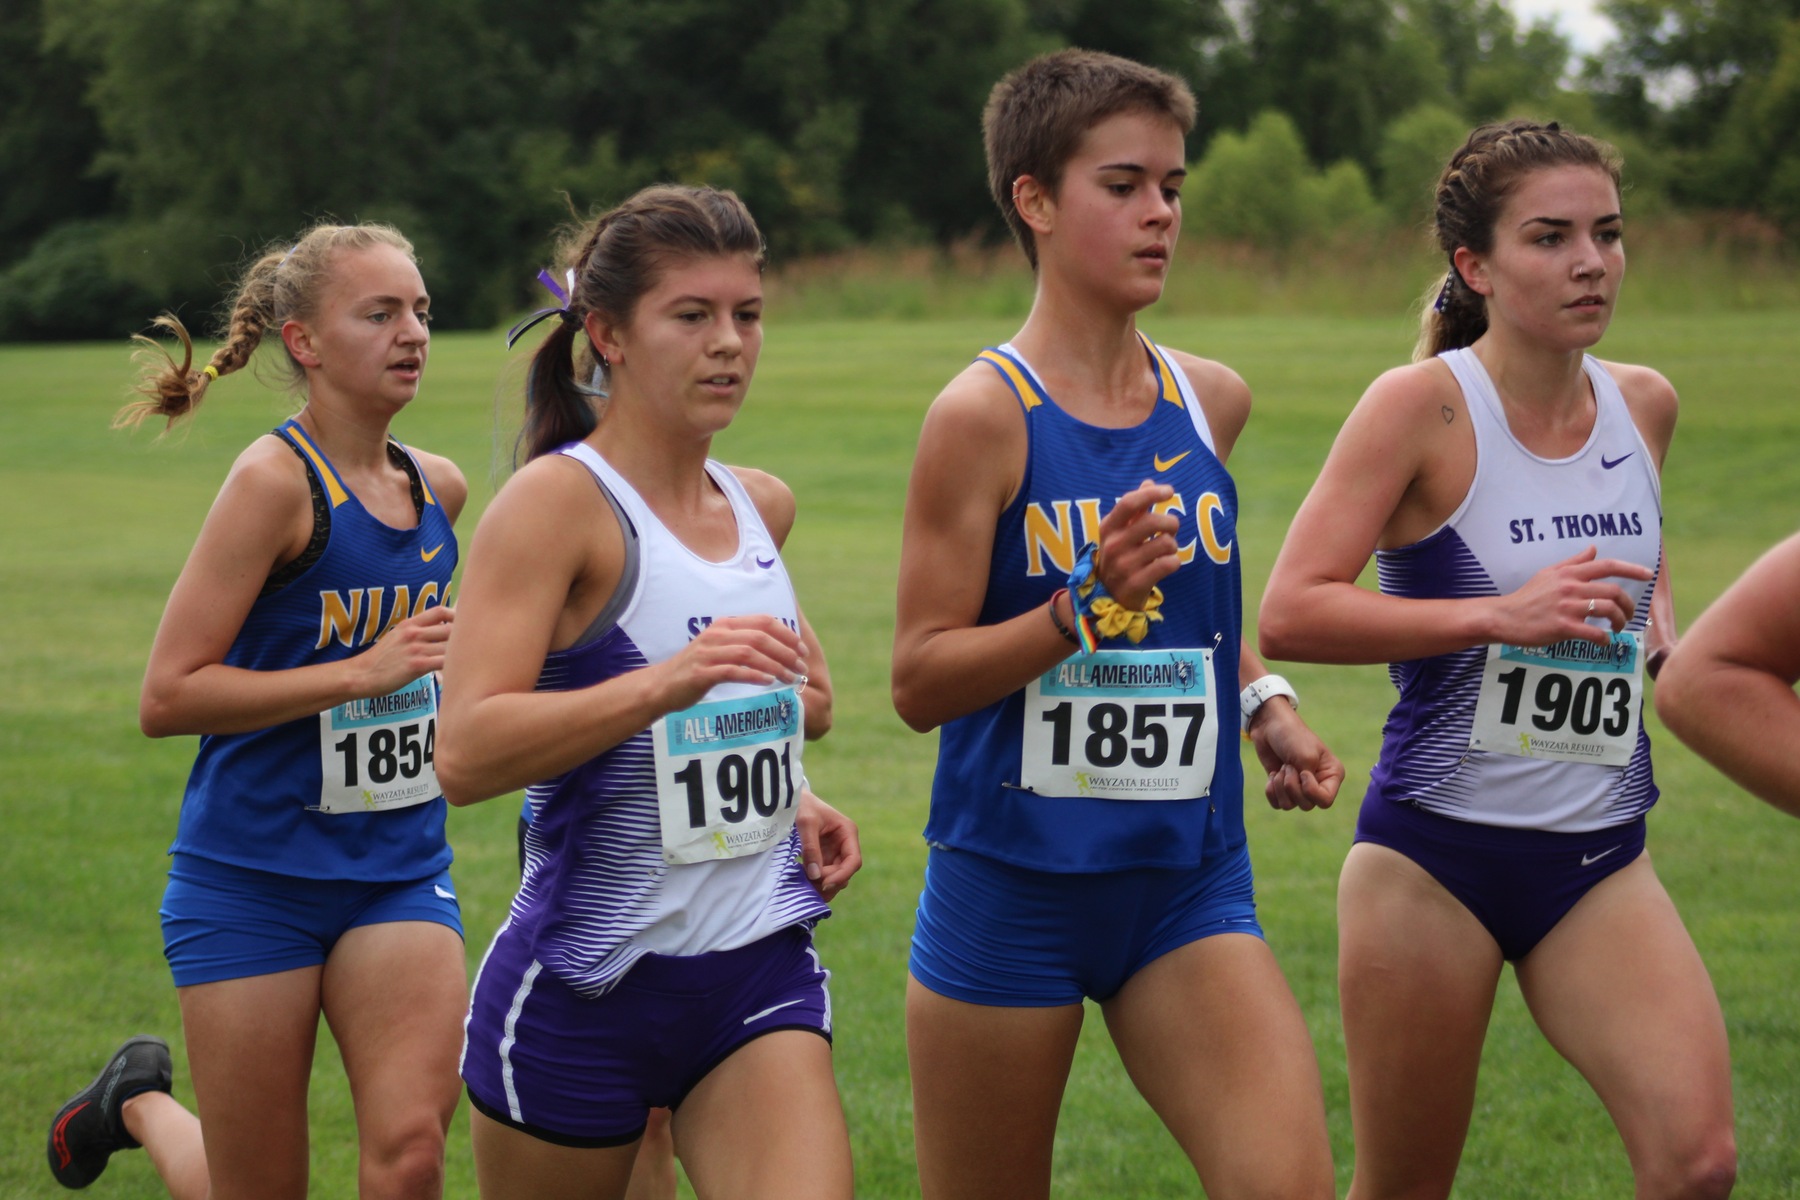 NIACC's Paula Jimenez (front) and Emma Davison compete at the Luther College All-American Invitational on Saturday in Decorah.